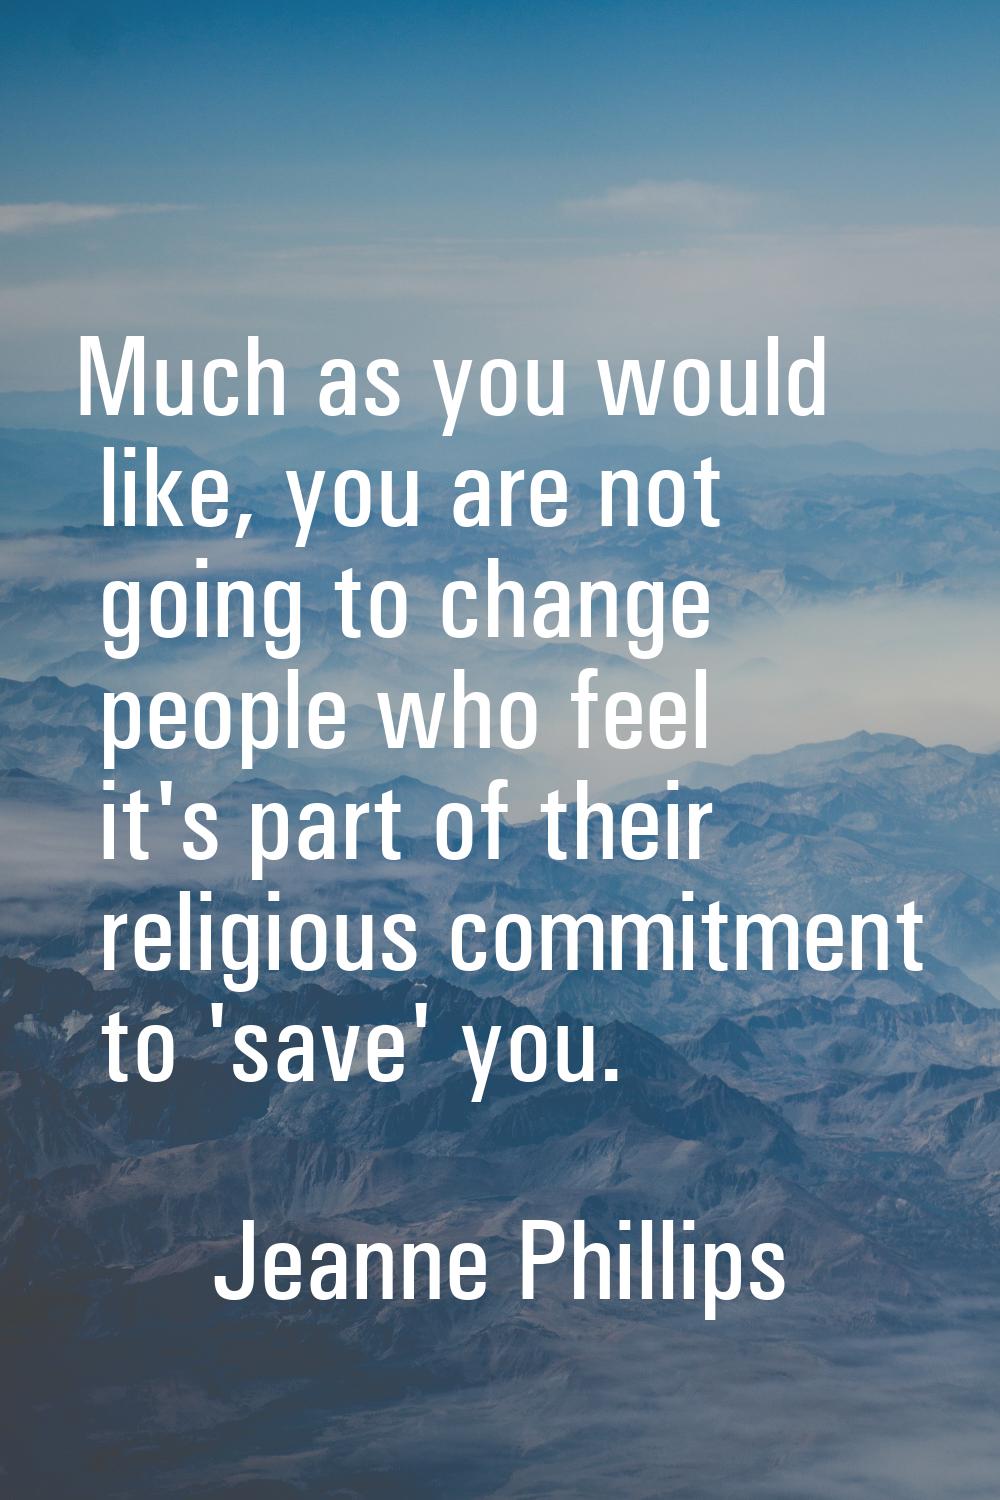 Much as you would like, you are not going to change people who feel it's part of their religious co